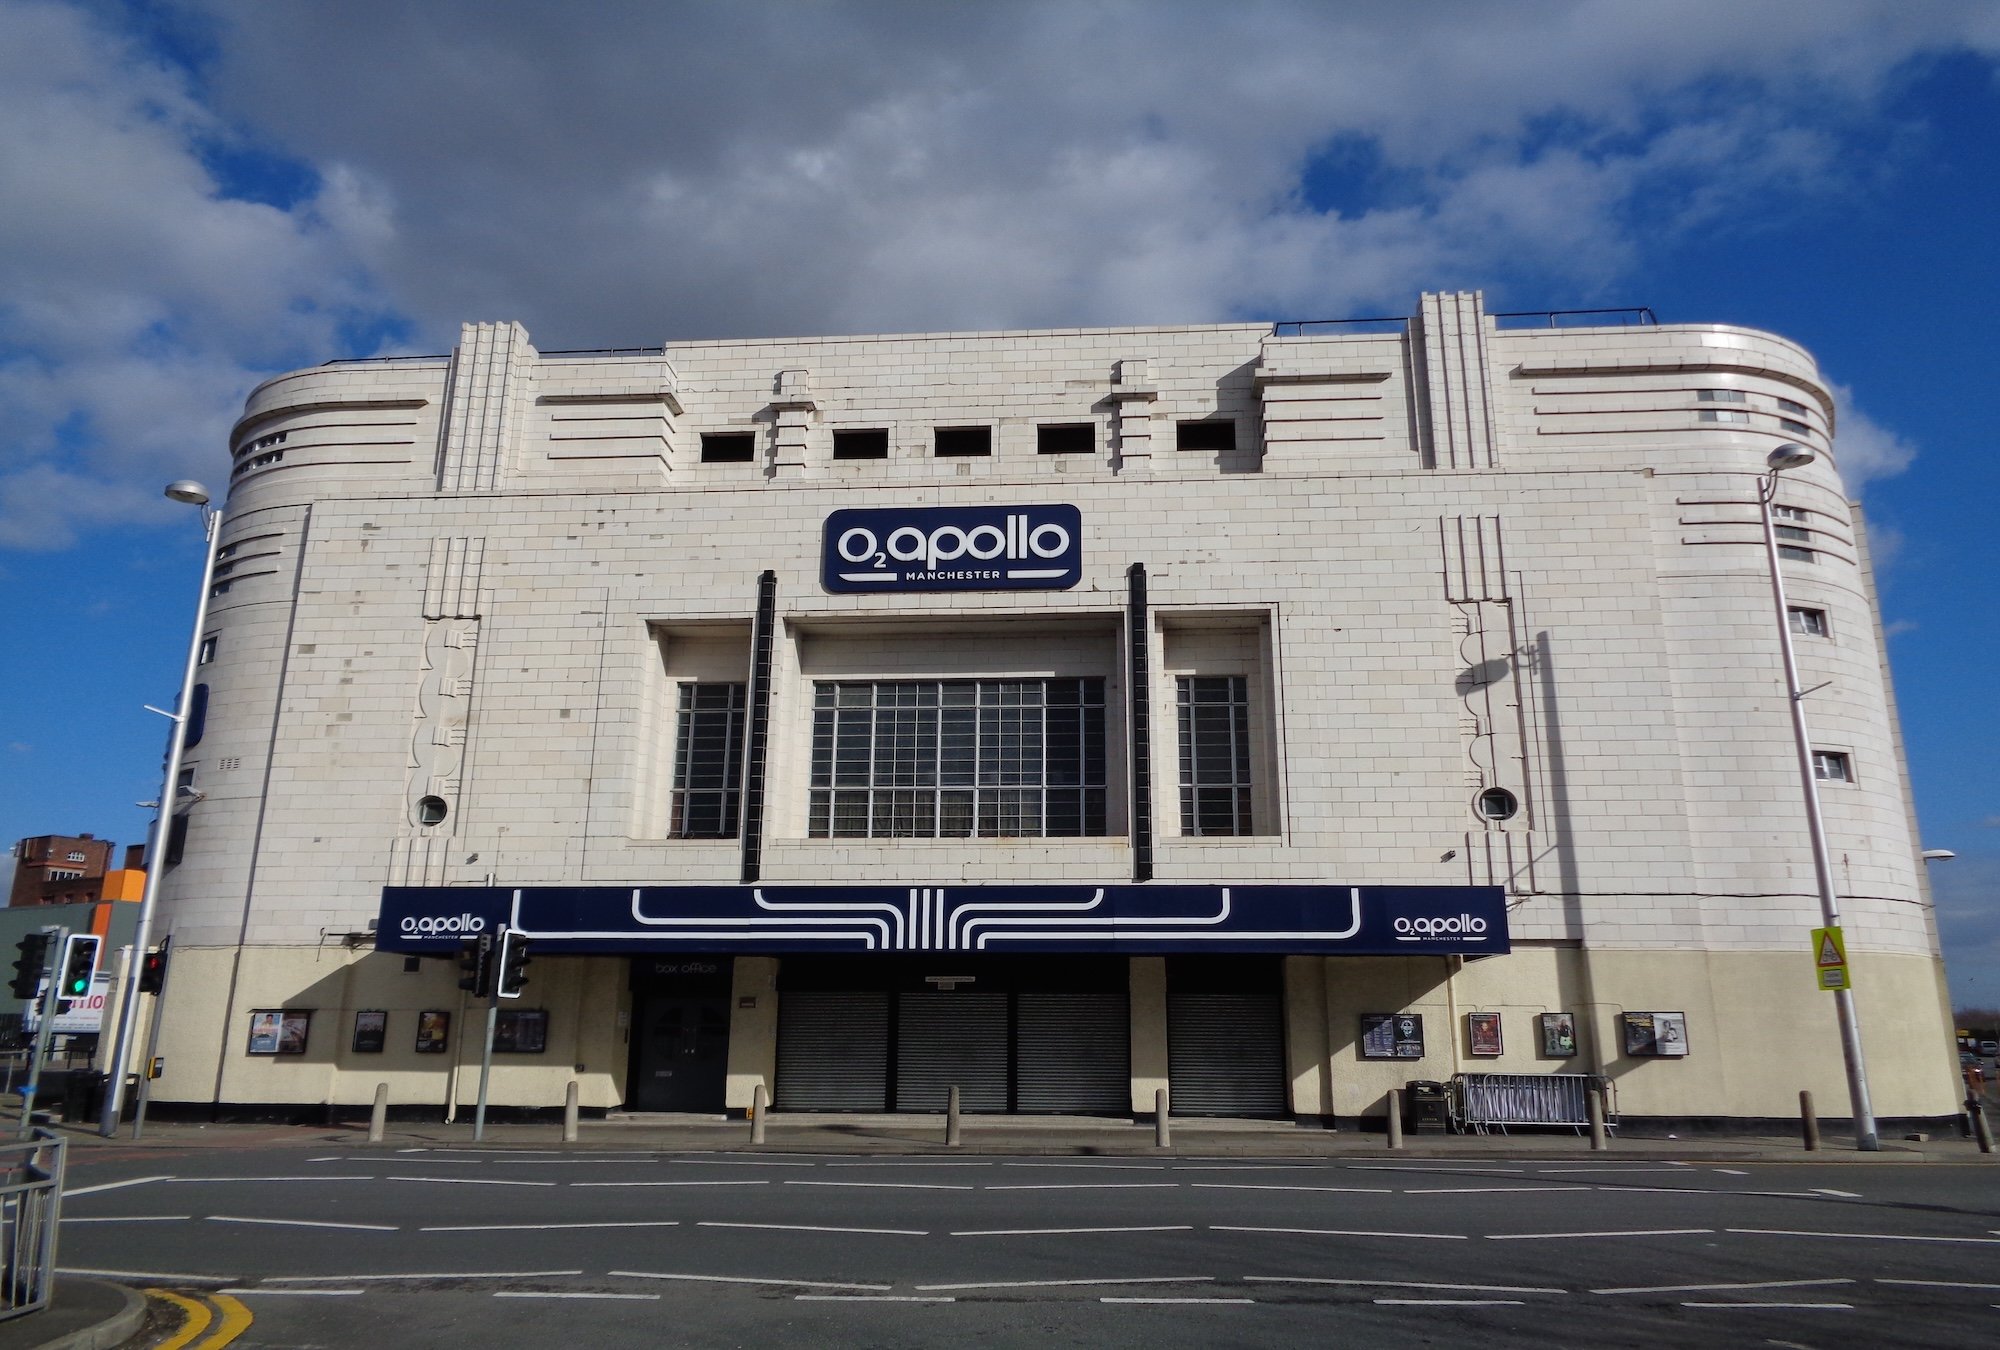 The O2 Apollo in Manchester is hosting A Concert to Fight Food Poverty as a part of its February events May